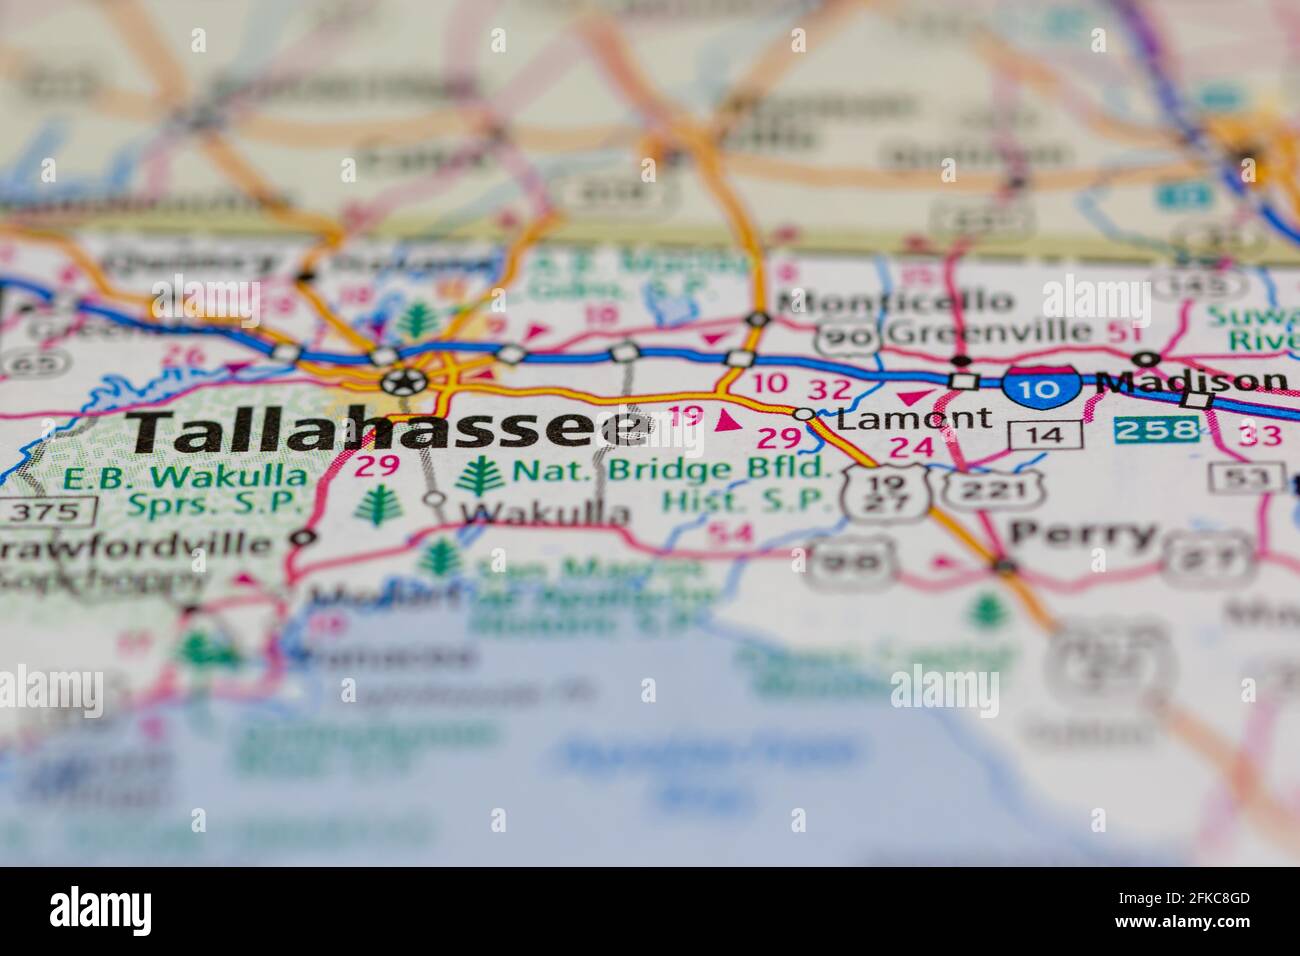 Tallahassee Florida USA Shown on a geography map or road map Stock Photo